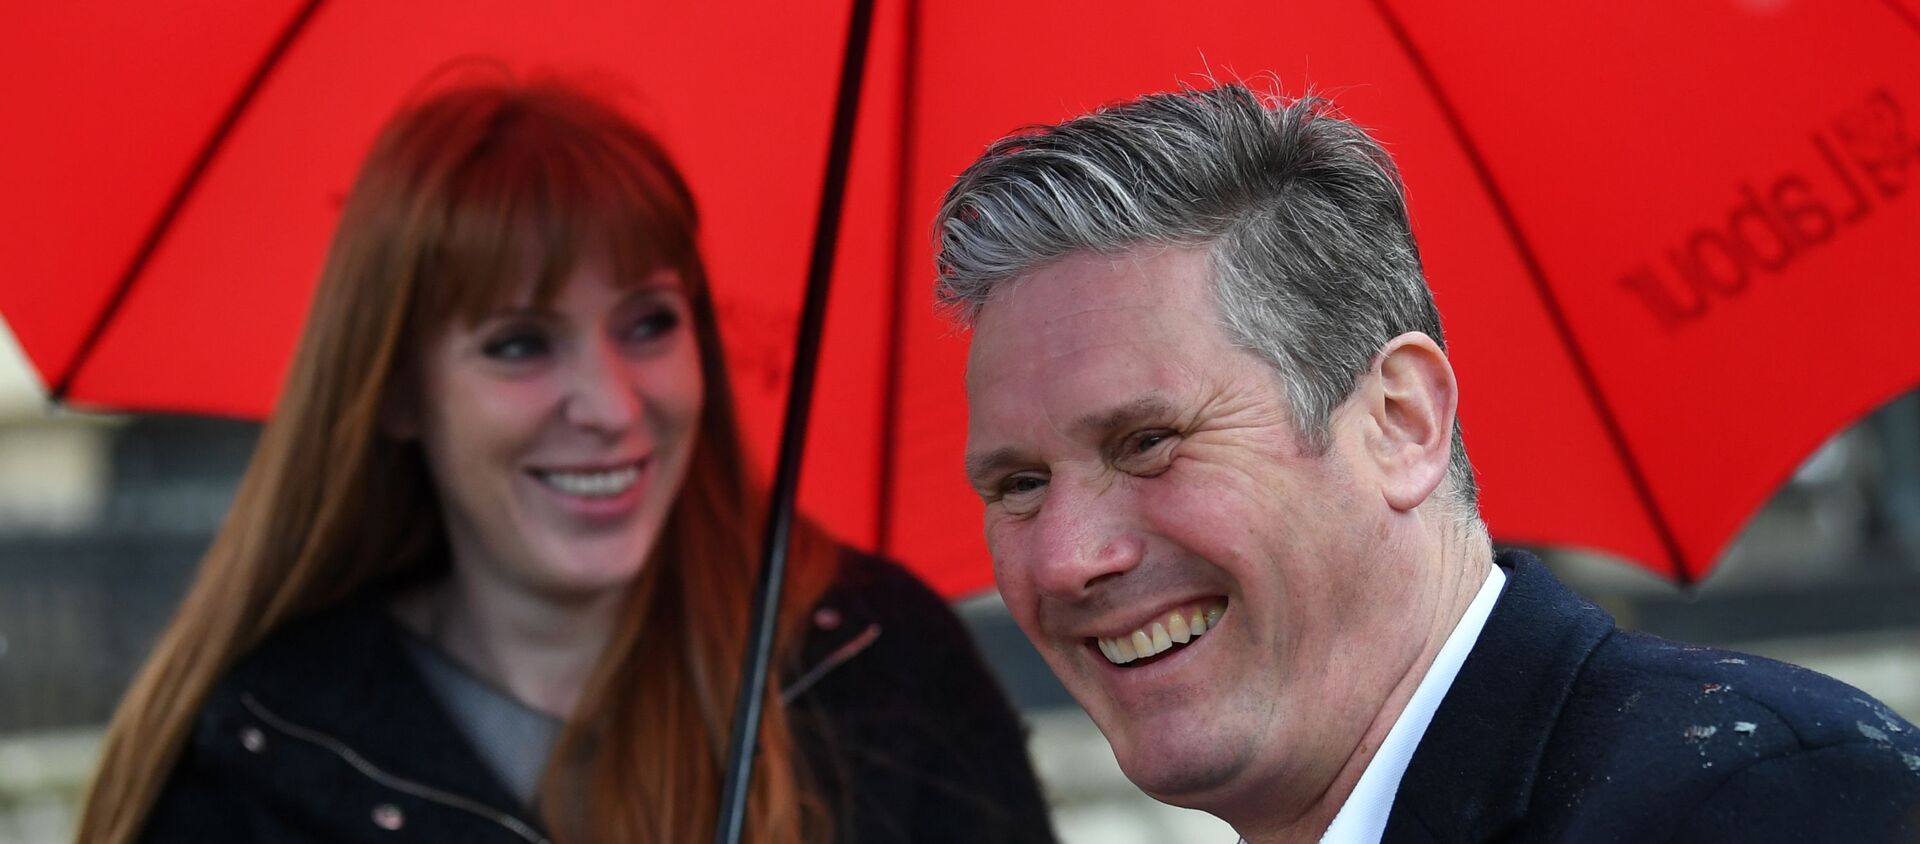 Labour Party leader Keir Starmer campaigns ahead of local elections, in Birmingham - Sputnik International, 1920, 11.05.2021